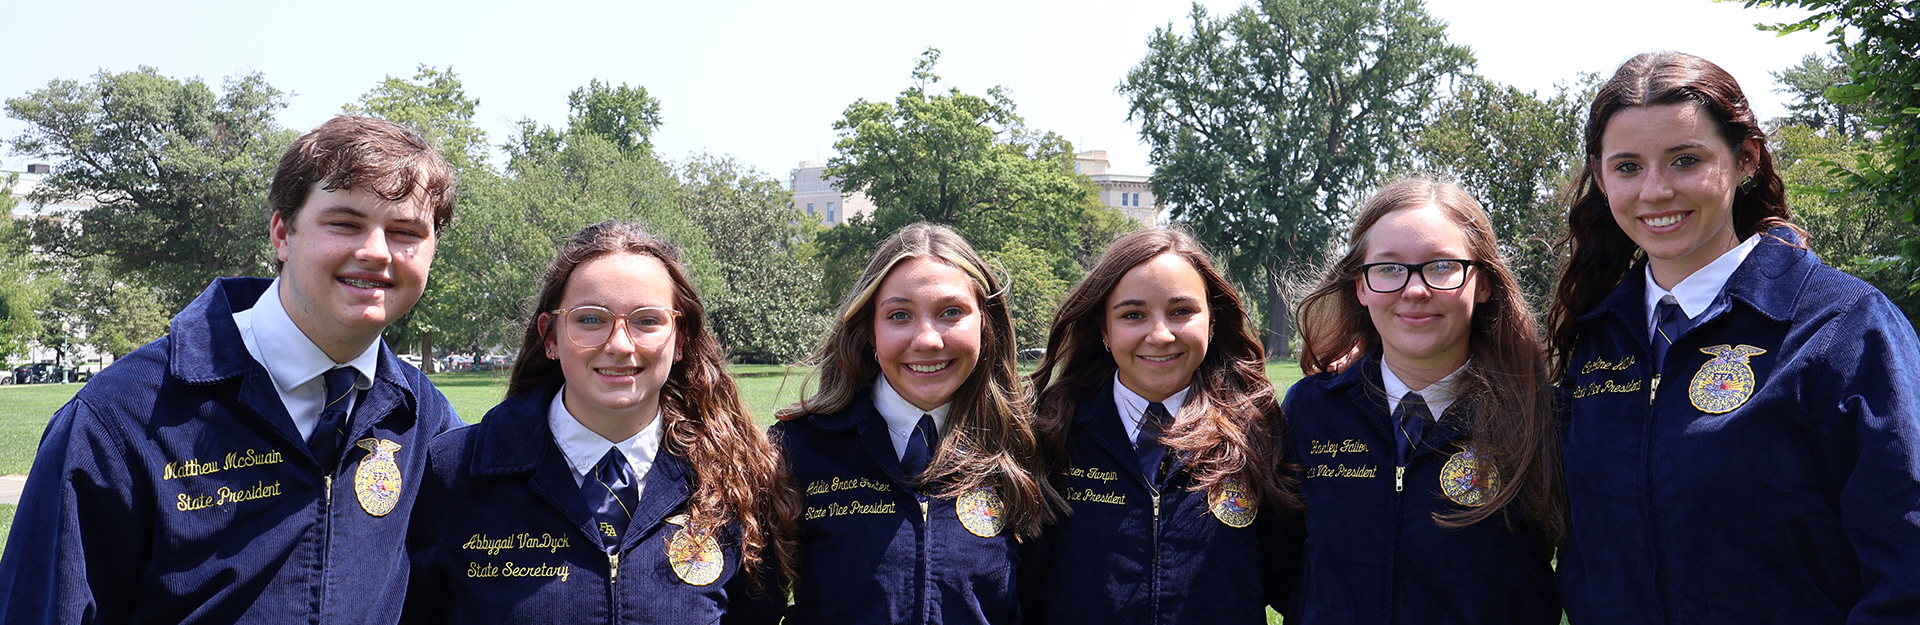 ffa officer group photo